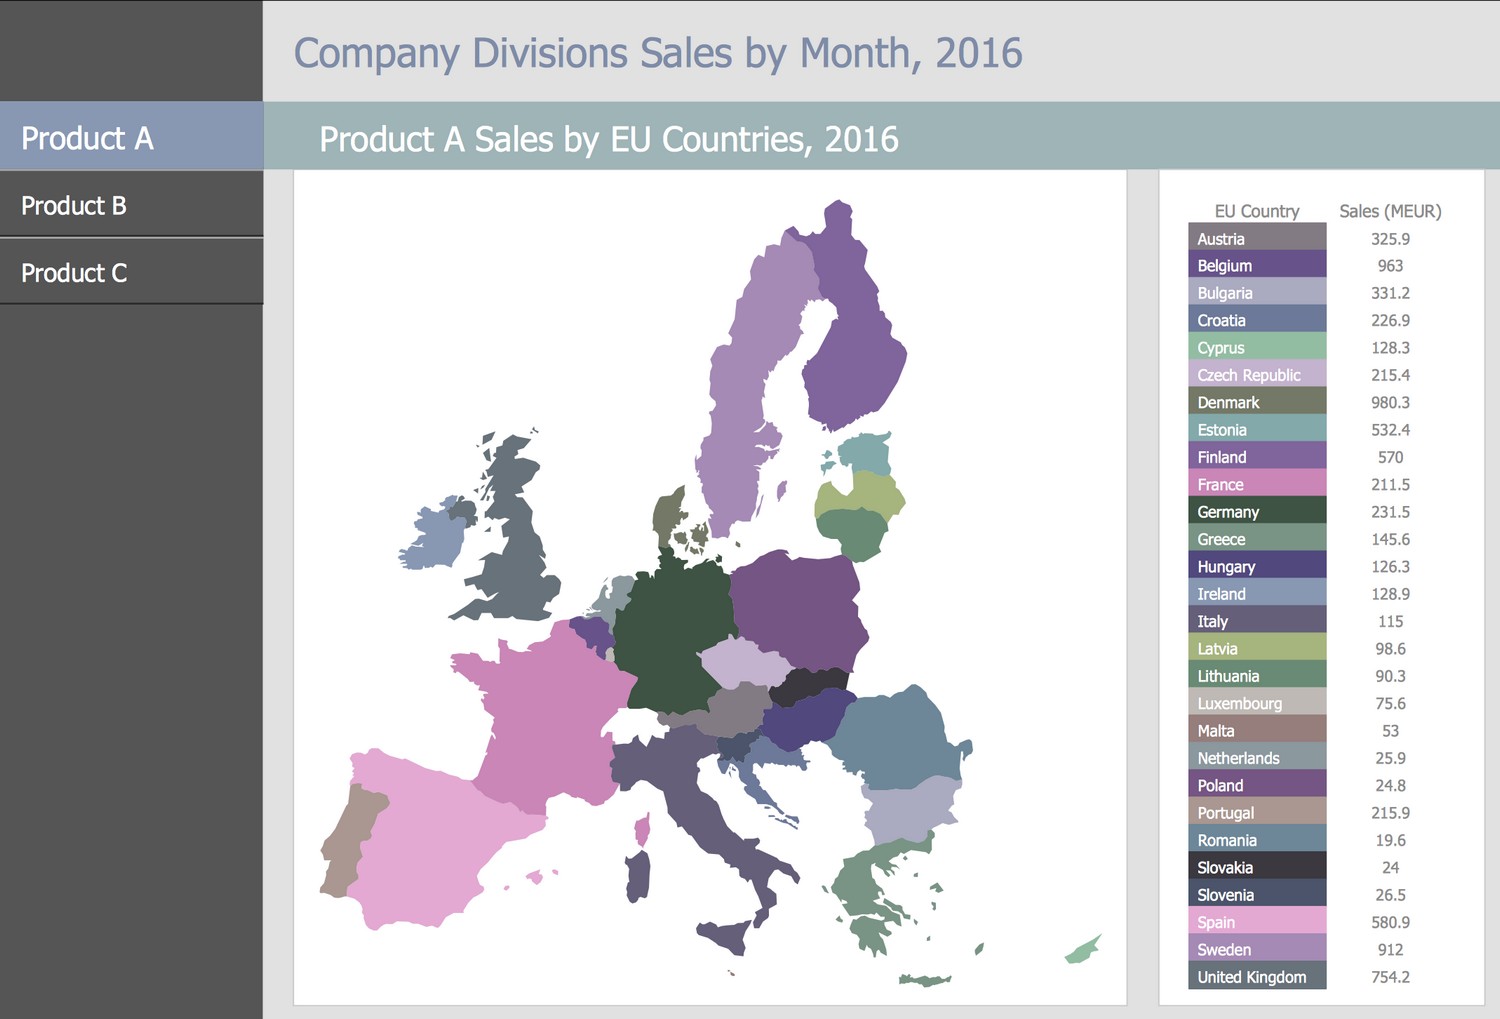 Business Intelligence Dashboard - Products A, B and C Sales by EU Countries, 2016